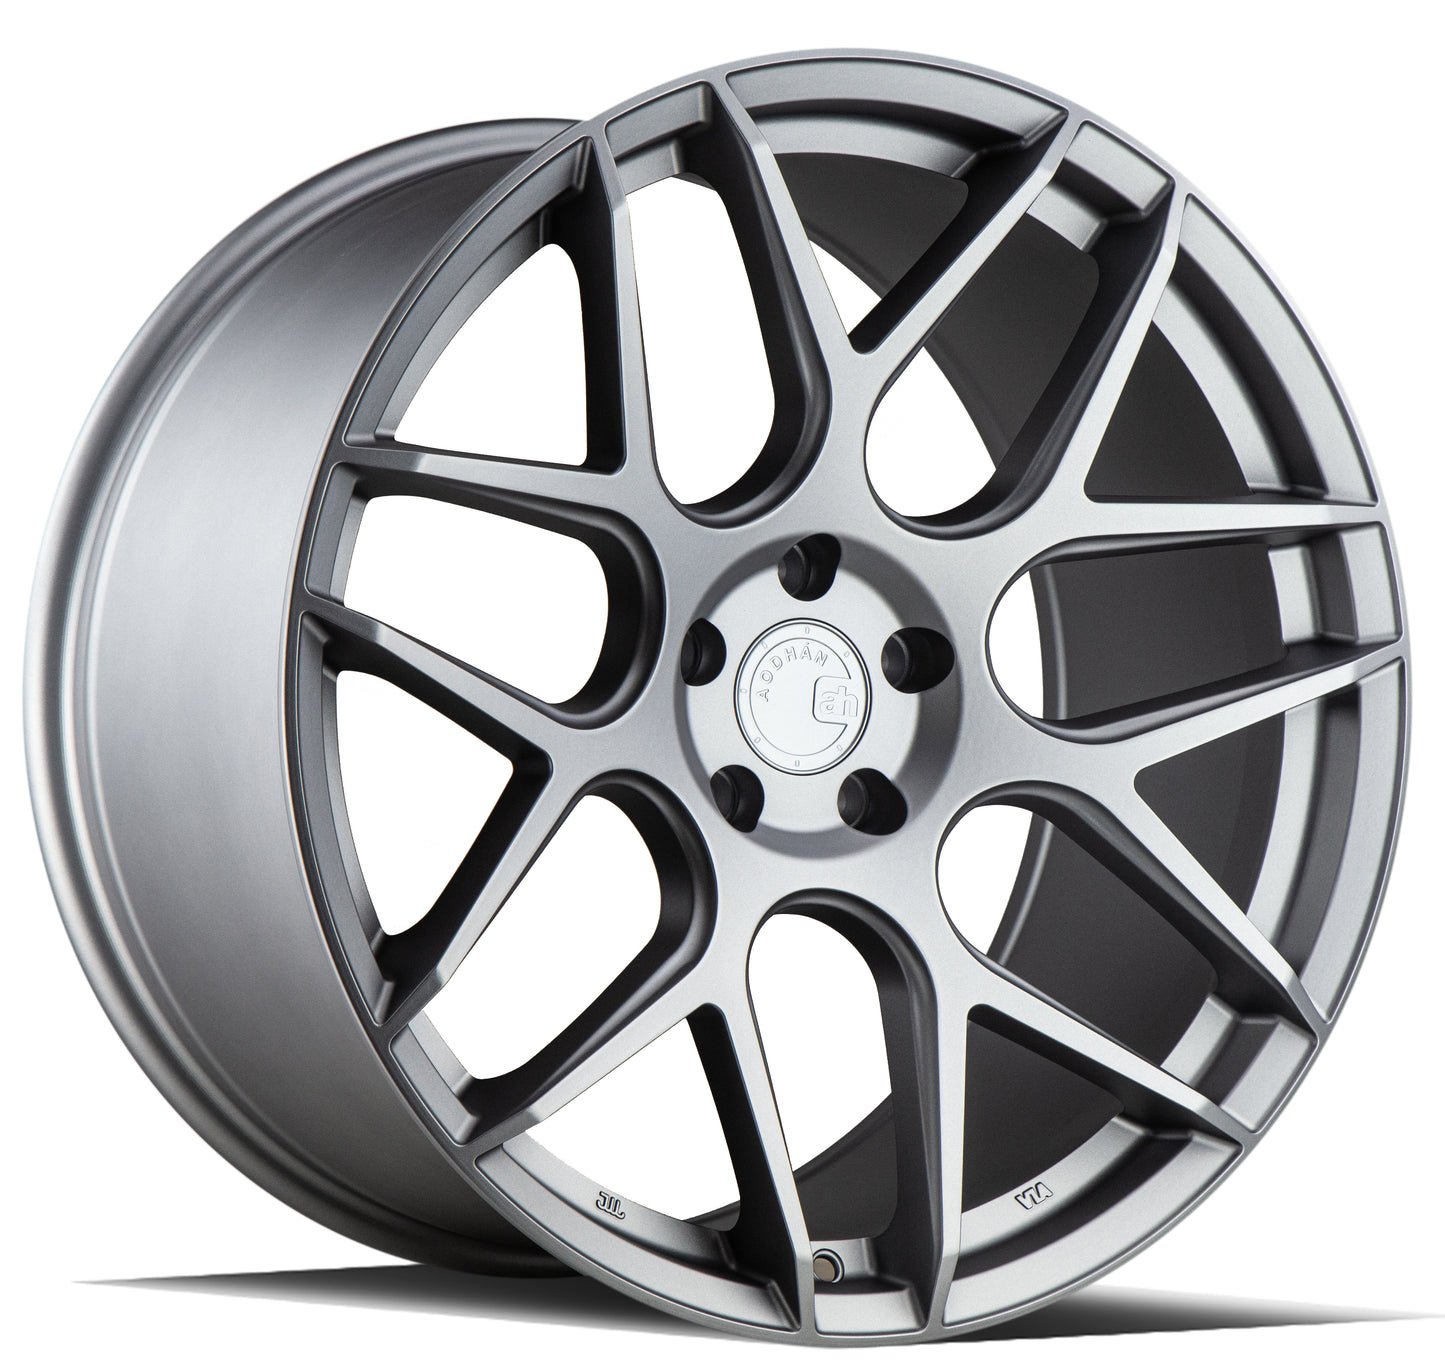 19" Aodhan AFF2 Matte Gray 5x120 ( Staggered Setup ) ( Set of 4 )